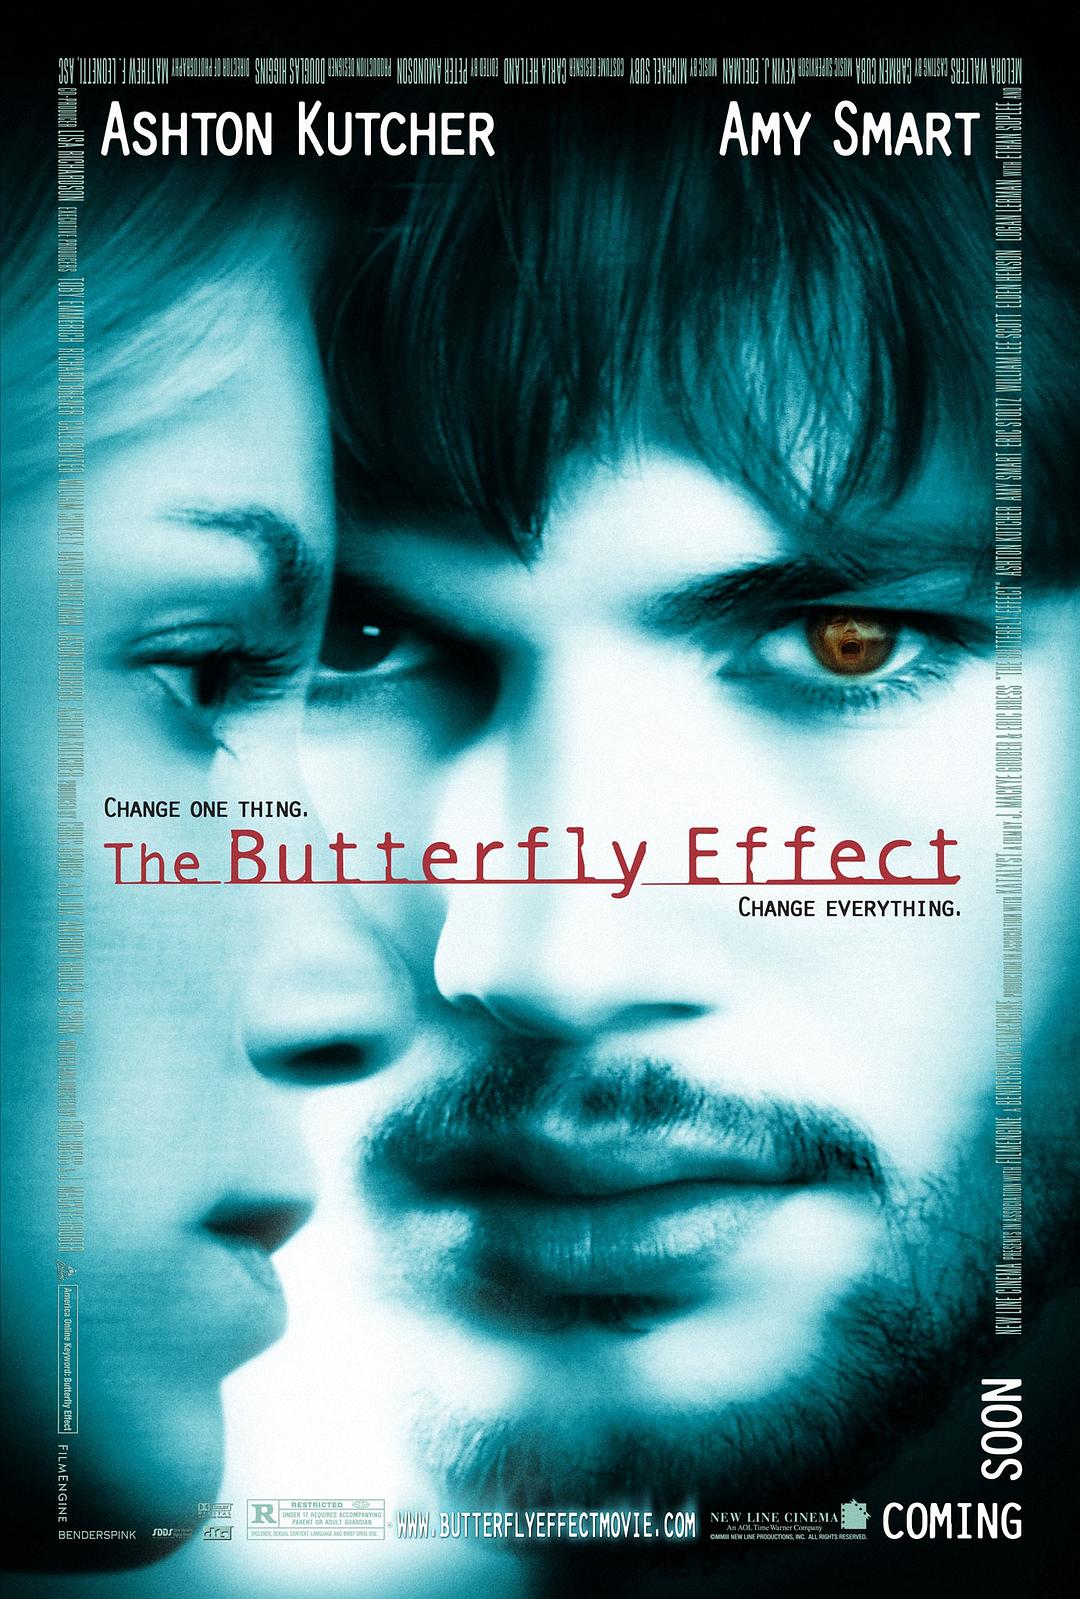 ЧӦ The.Butterfly.Effect.2004.DC.1080p.BluRay.x264.DTS-FGT 10.98GB-1.png